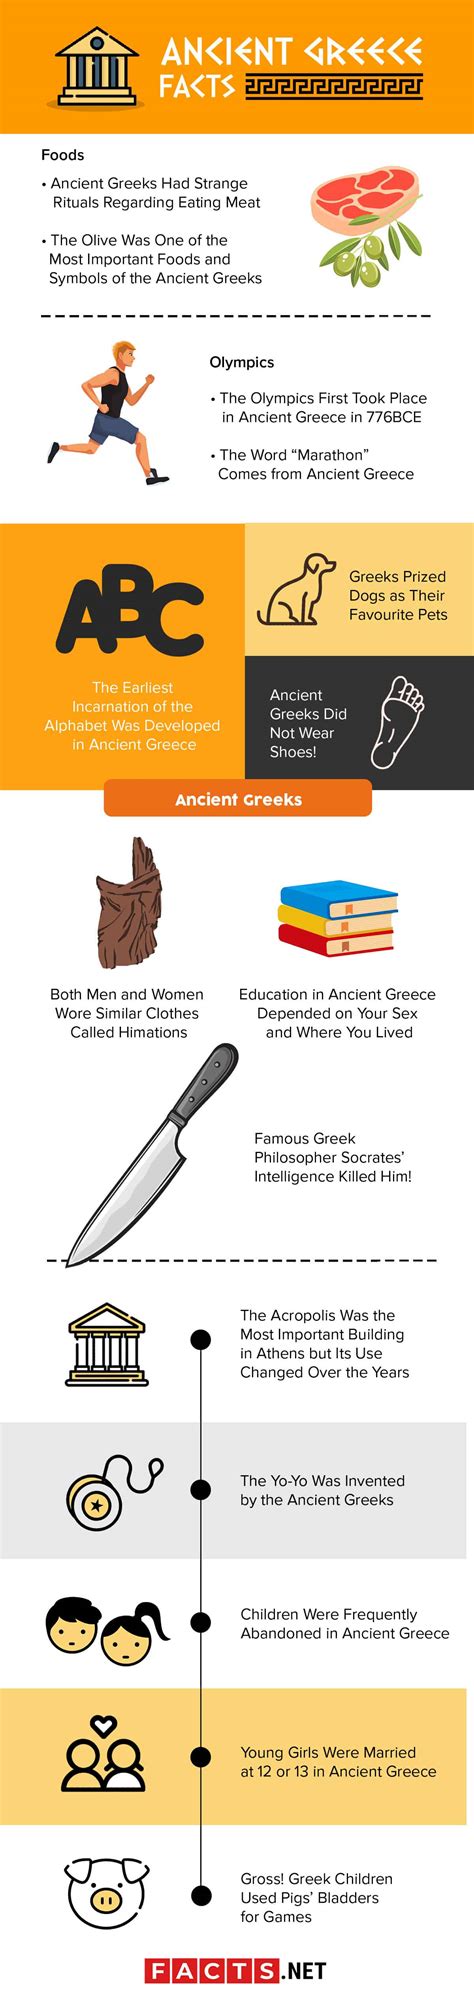 The ancient greeks would eat eggs from quail and hens, fish, legumes, olives, cheeses, bread, figs, and any vegetables they could grow, which might include arugula, asparagus, cabbage, carrots, and cucumbers. Top 15 Ancient Greece Facts - Culture, History, Art and ...